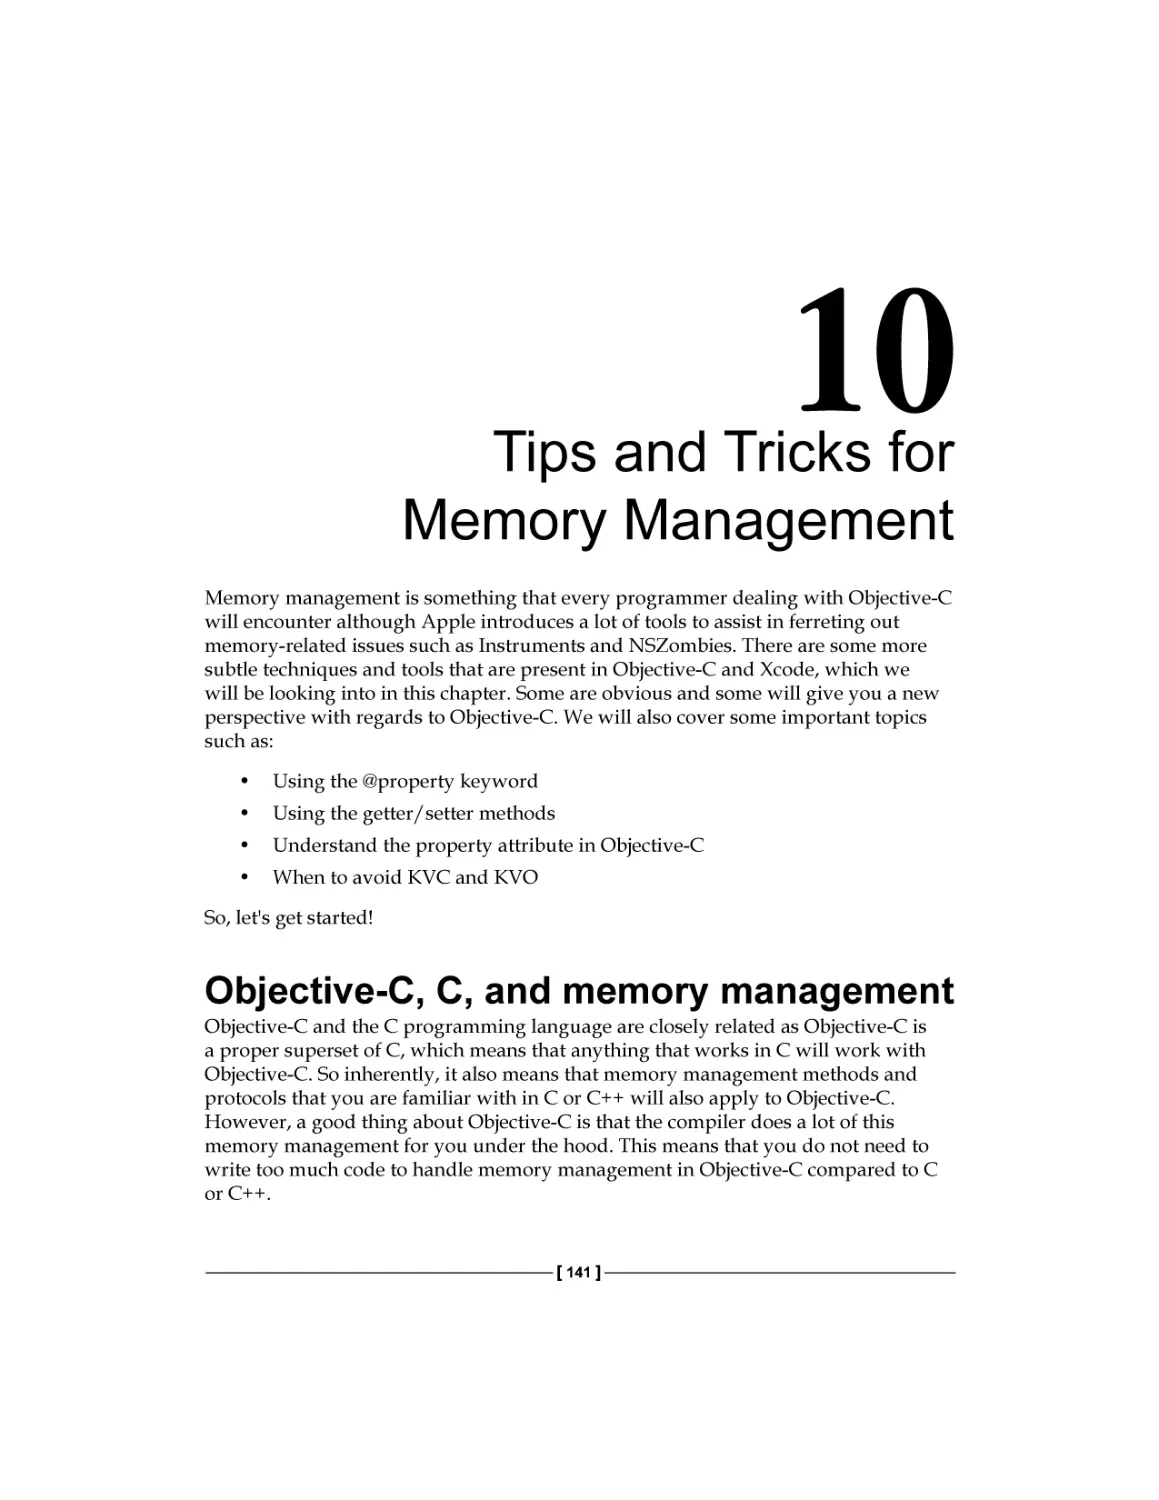 Chapter 10
Objective-C, C, and memory management